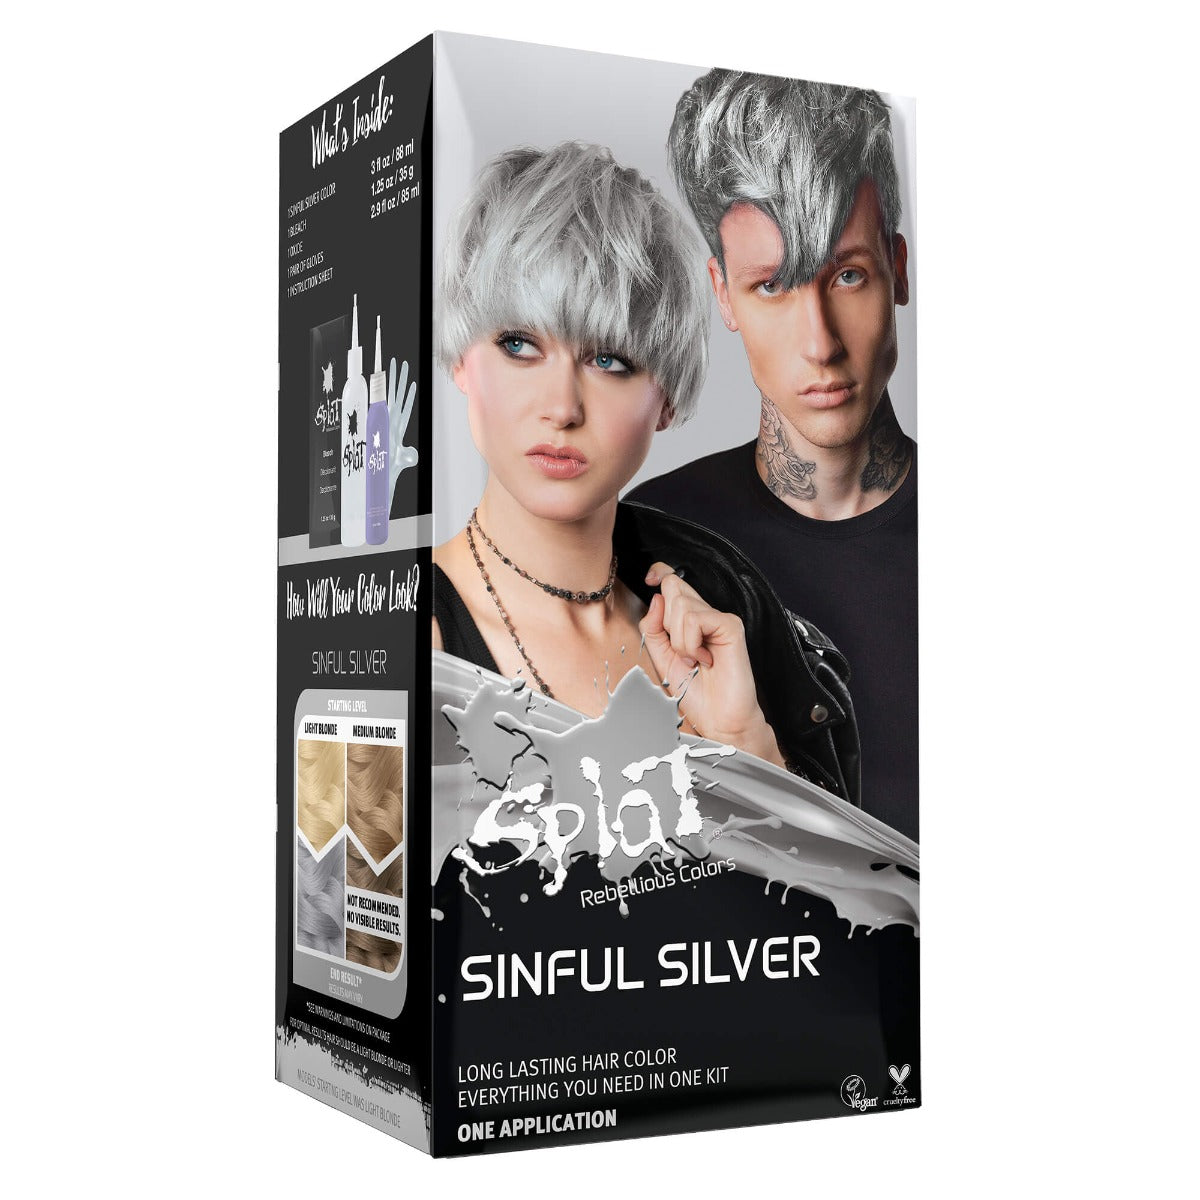 Original Complete Kit with Bleach and Semi-Permanent Hair Color - Sinful Silver